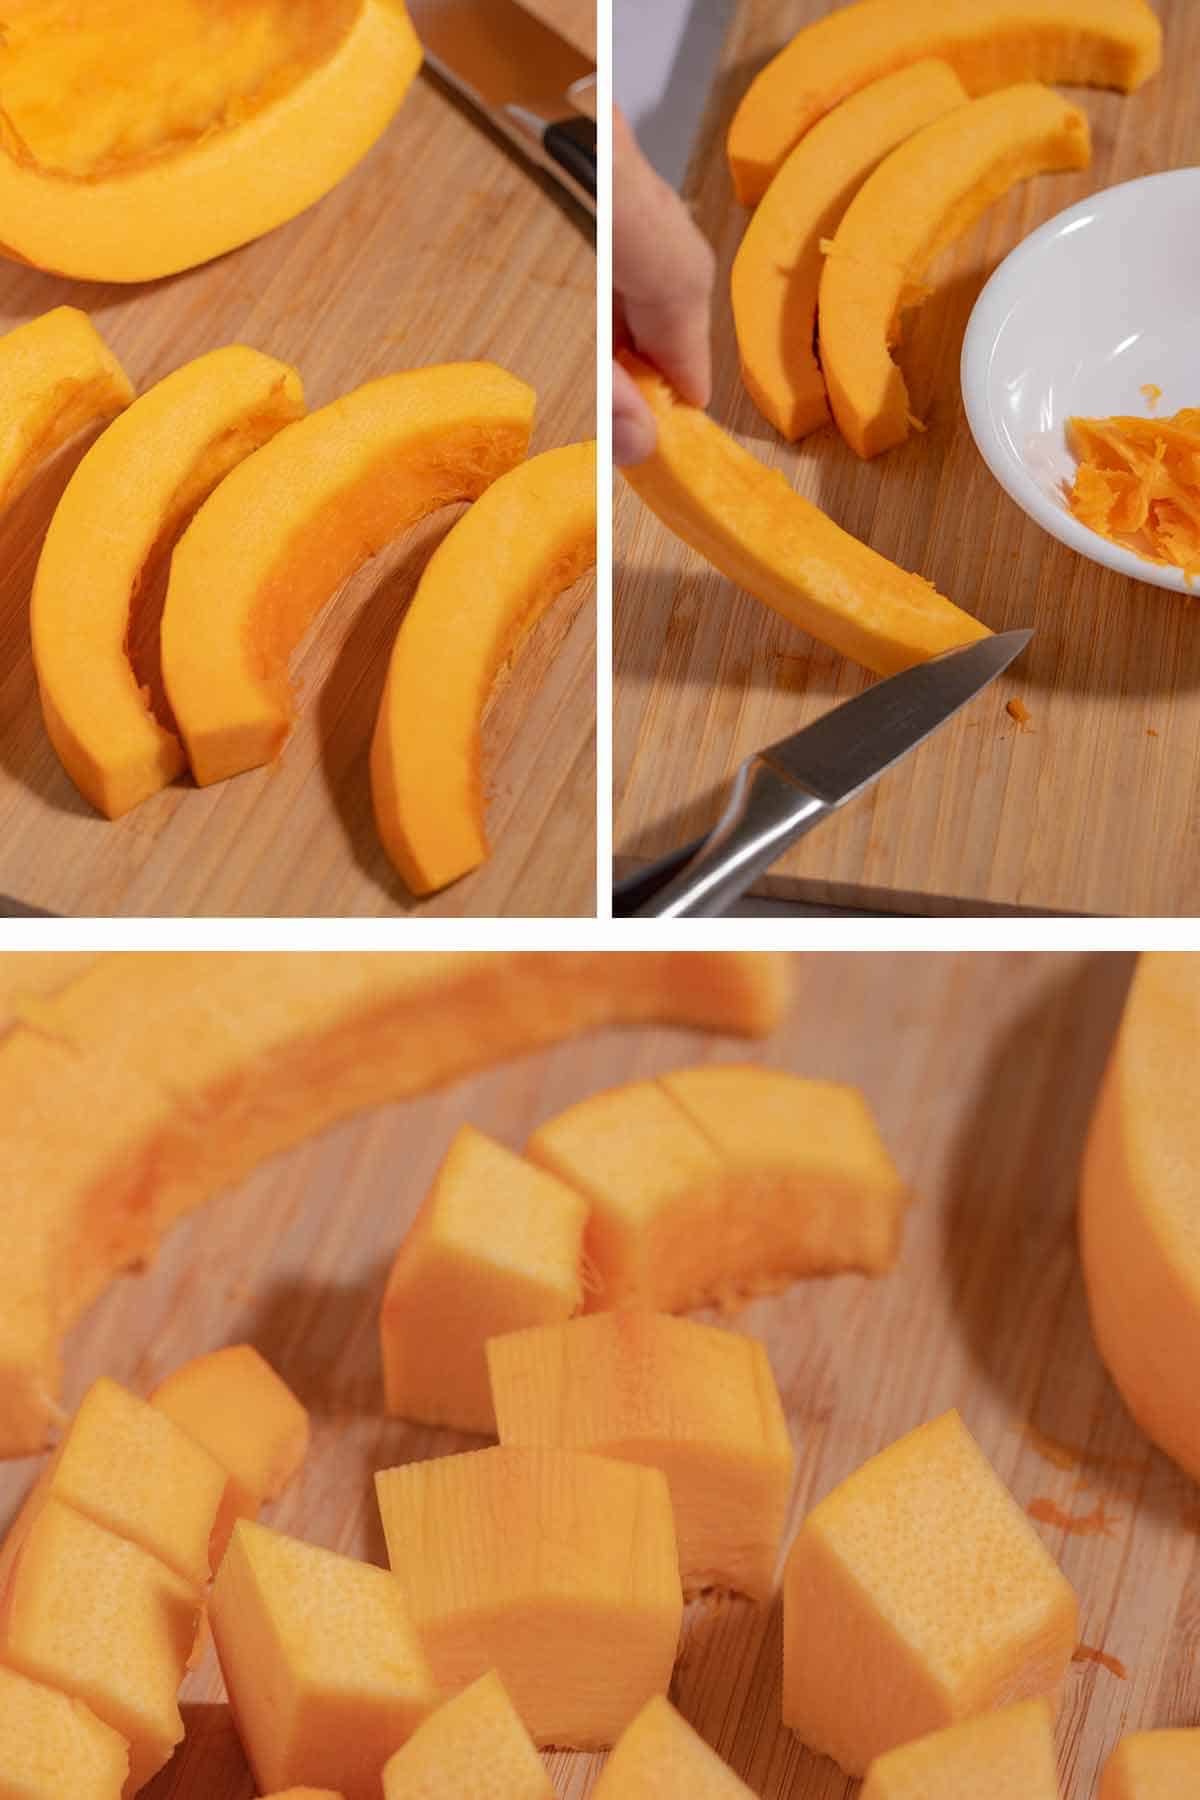 Three progression shots showing slicing and cubing the peeled pumpkin.